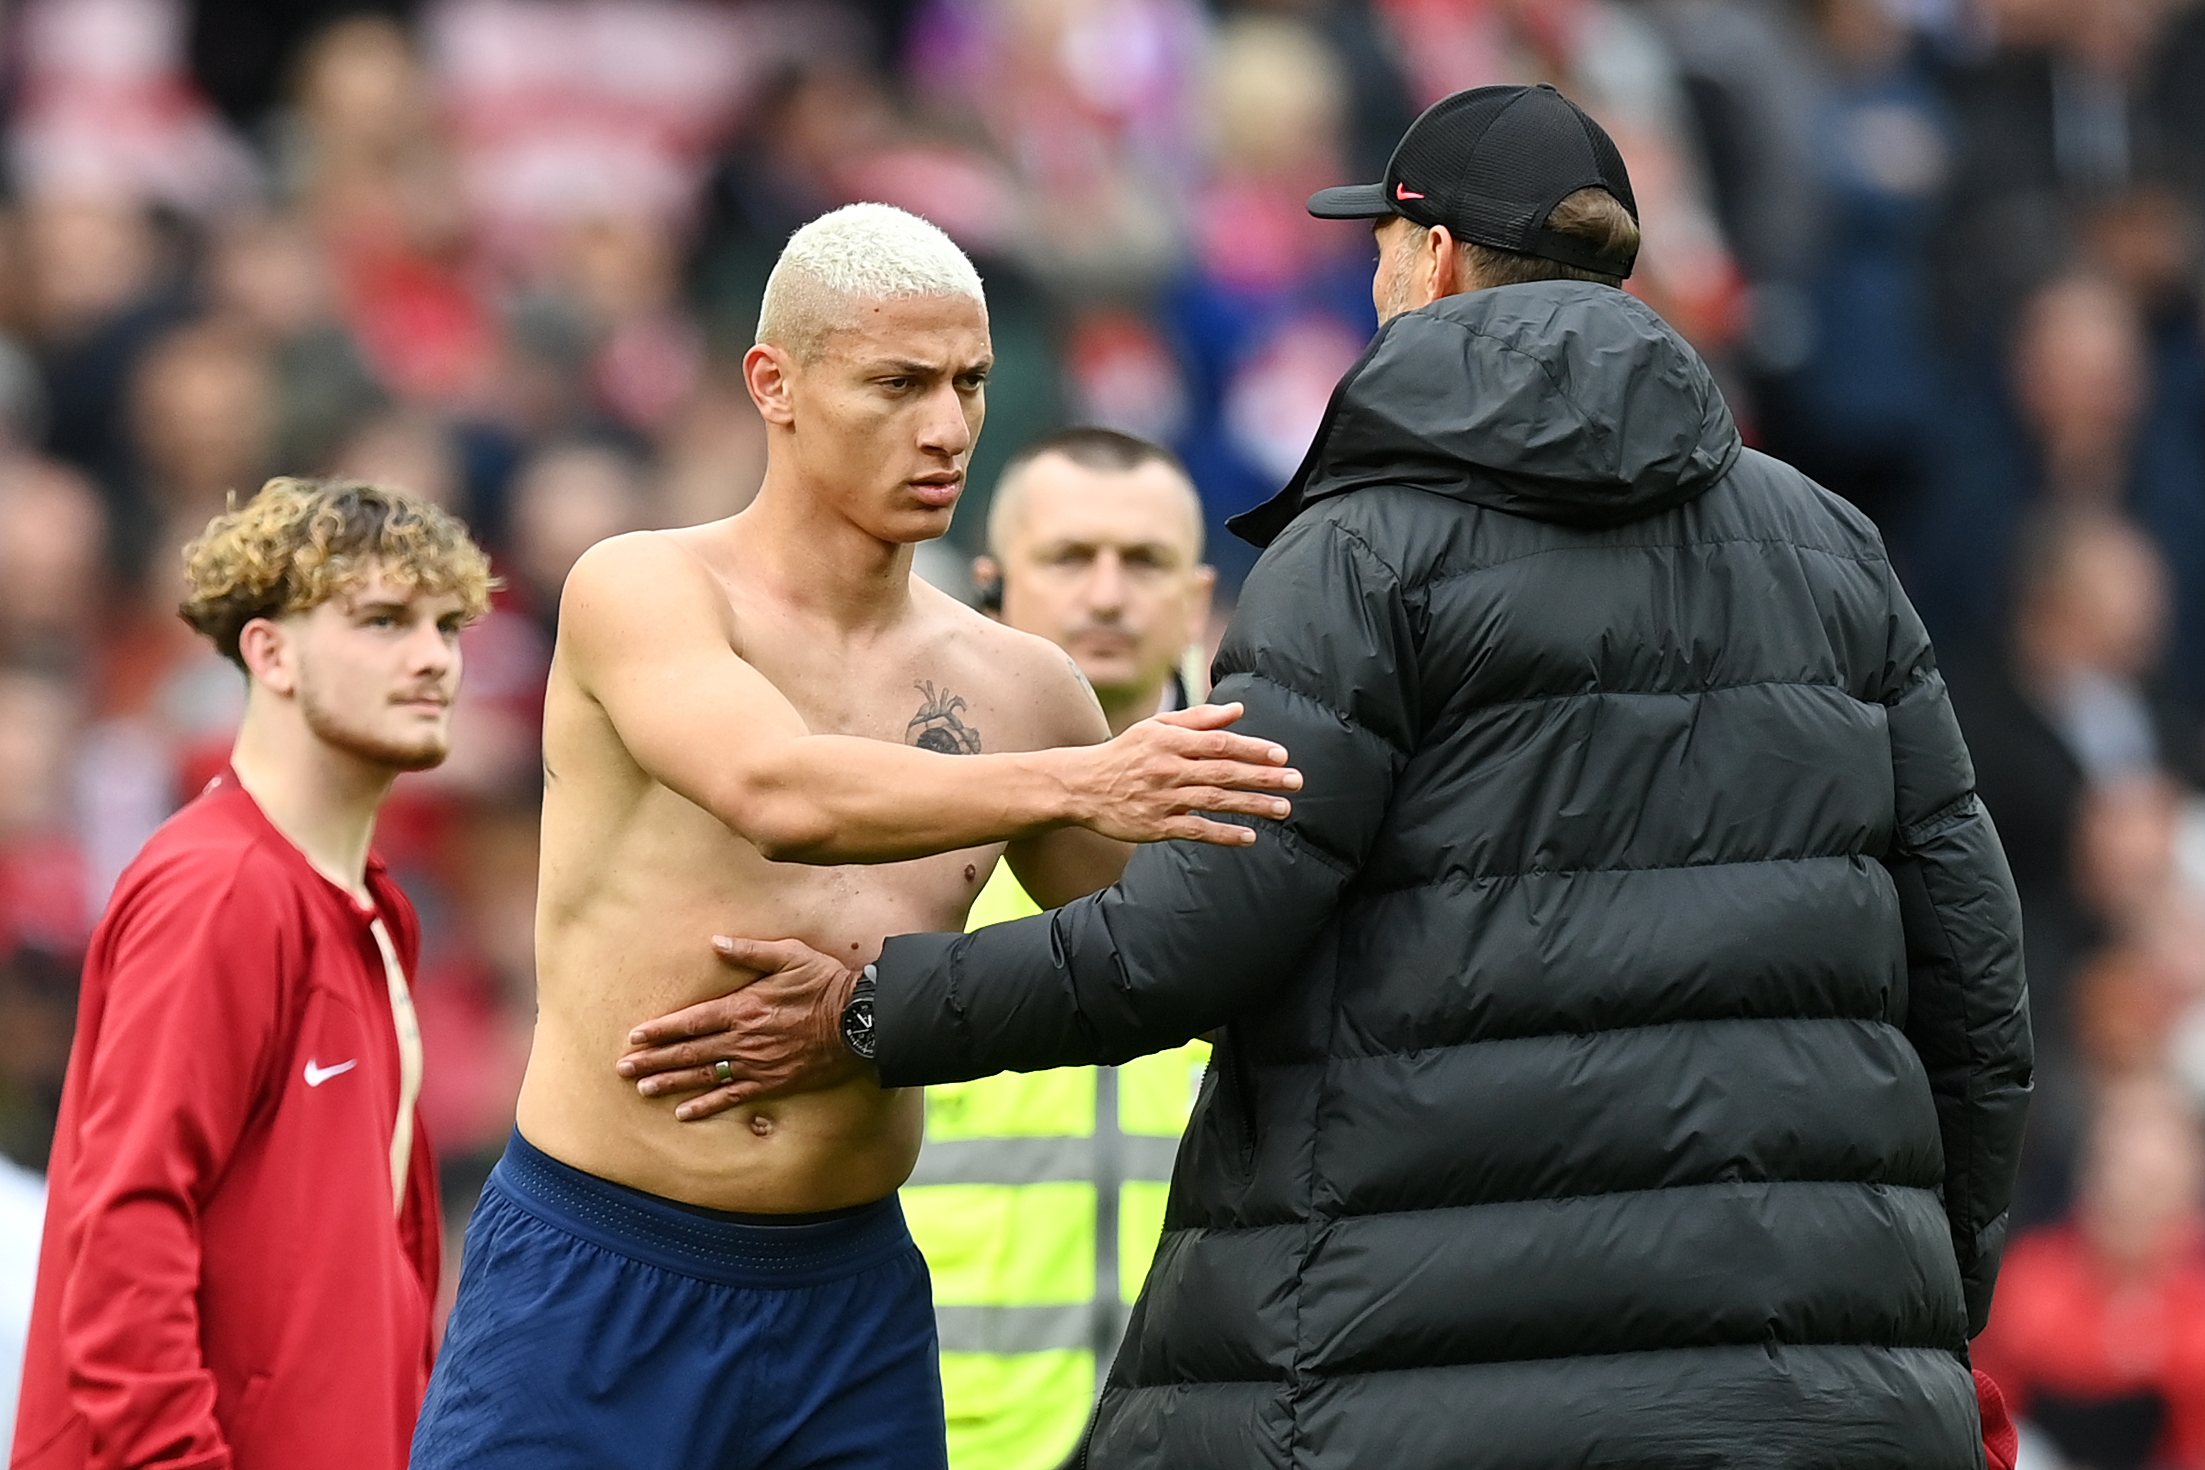 Richarlison of Tottenham Hotspur interacts with Juergen Klopp, Manager of Liverpool, after the Premier League match between Liverpool FC and Tottenham Hotspur at Anfield on April 30, 2023 in Liverpool, England.